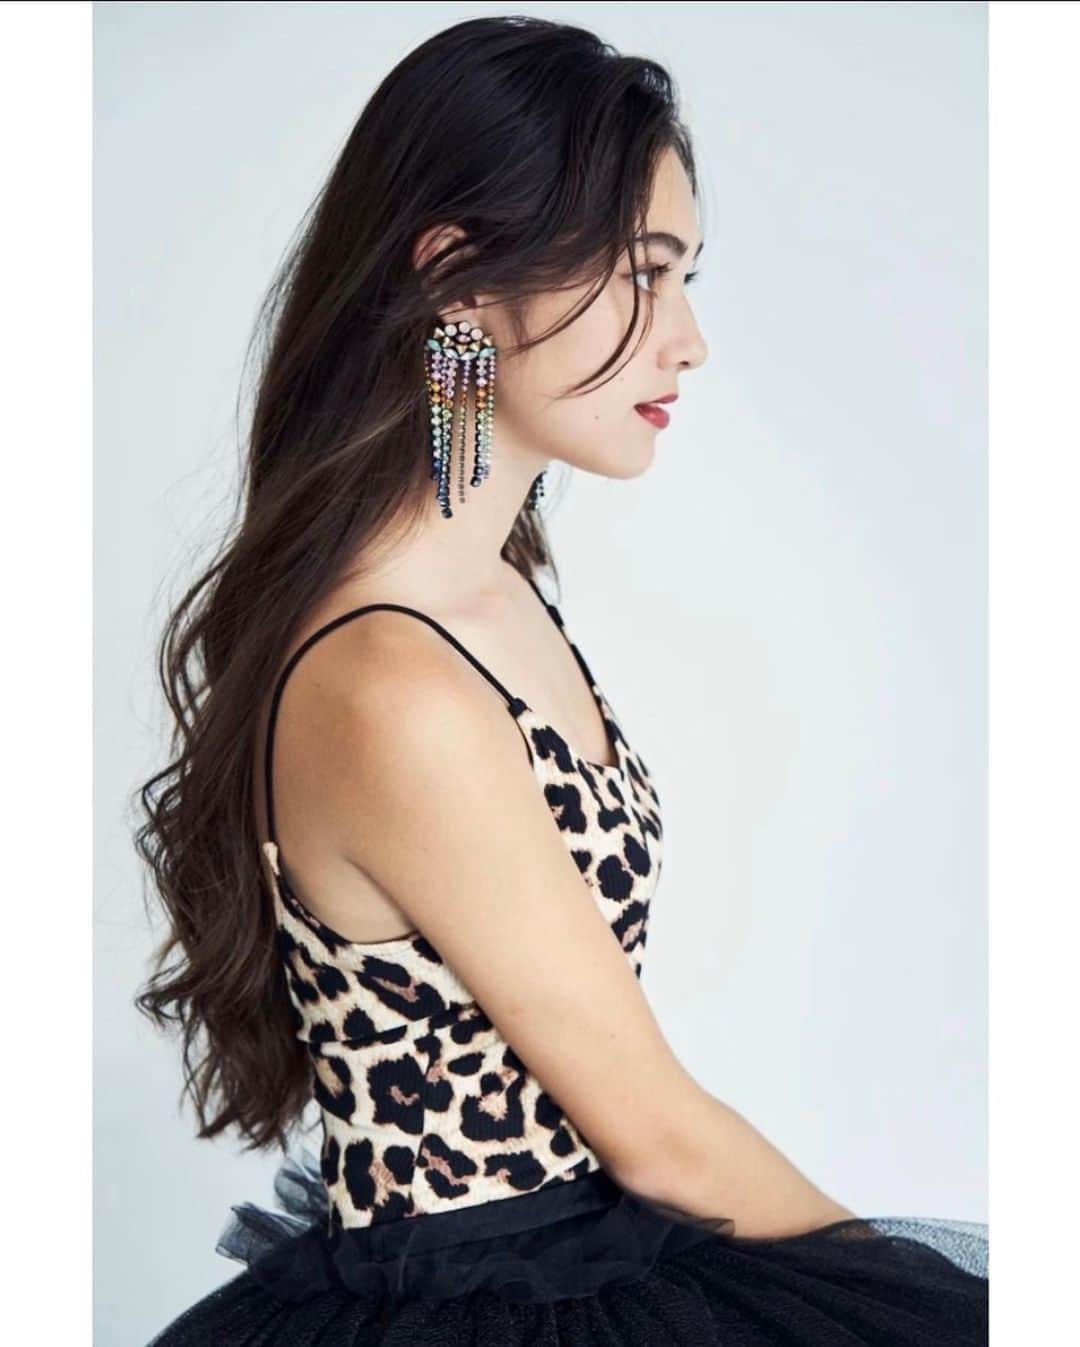 Eidaのインスタグラム：「time to wrap up this year🥲 with these fun photos from summer ‘22! can’t wait for more shoots in 2023☺️  #leopardprint #model #aesthetic #2022 #clothing #photoinspo #photoshoot #modeling #editorial #sideprofile #profilepictures #summer22」